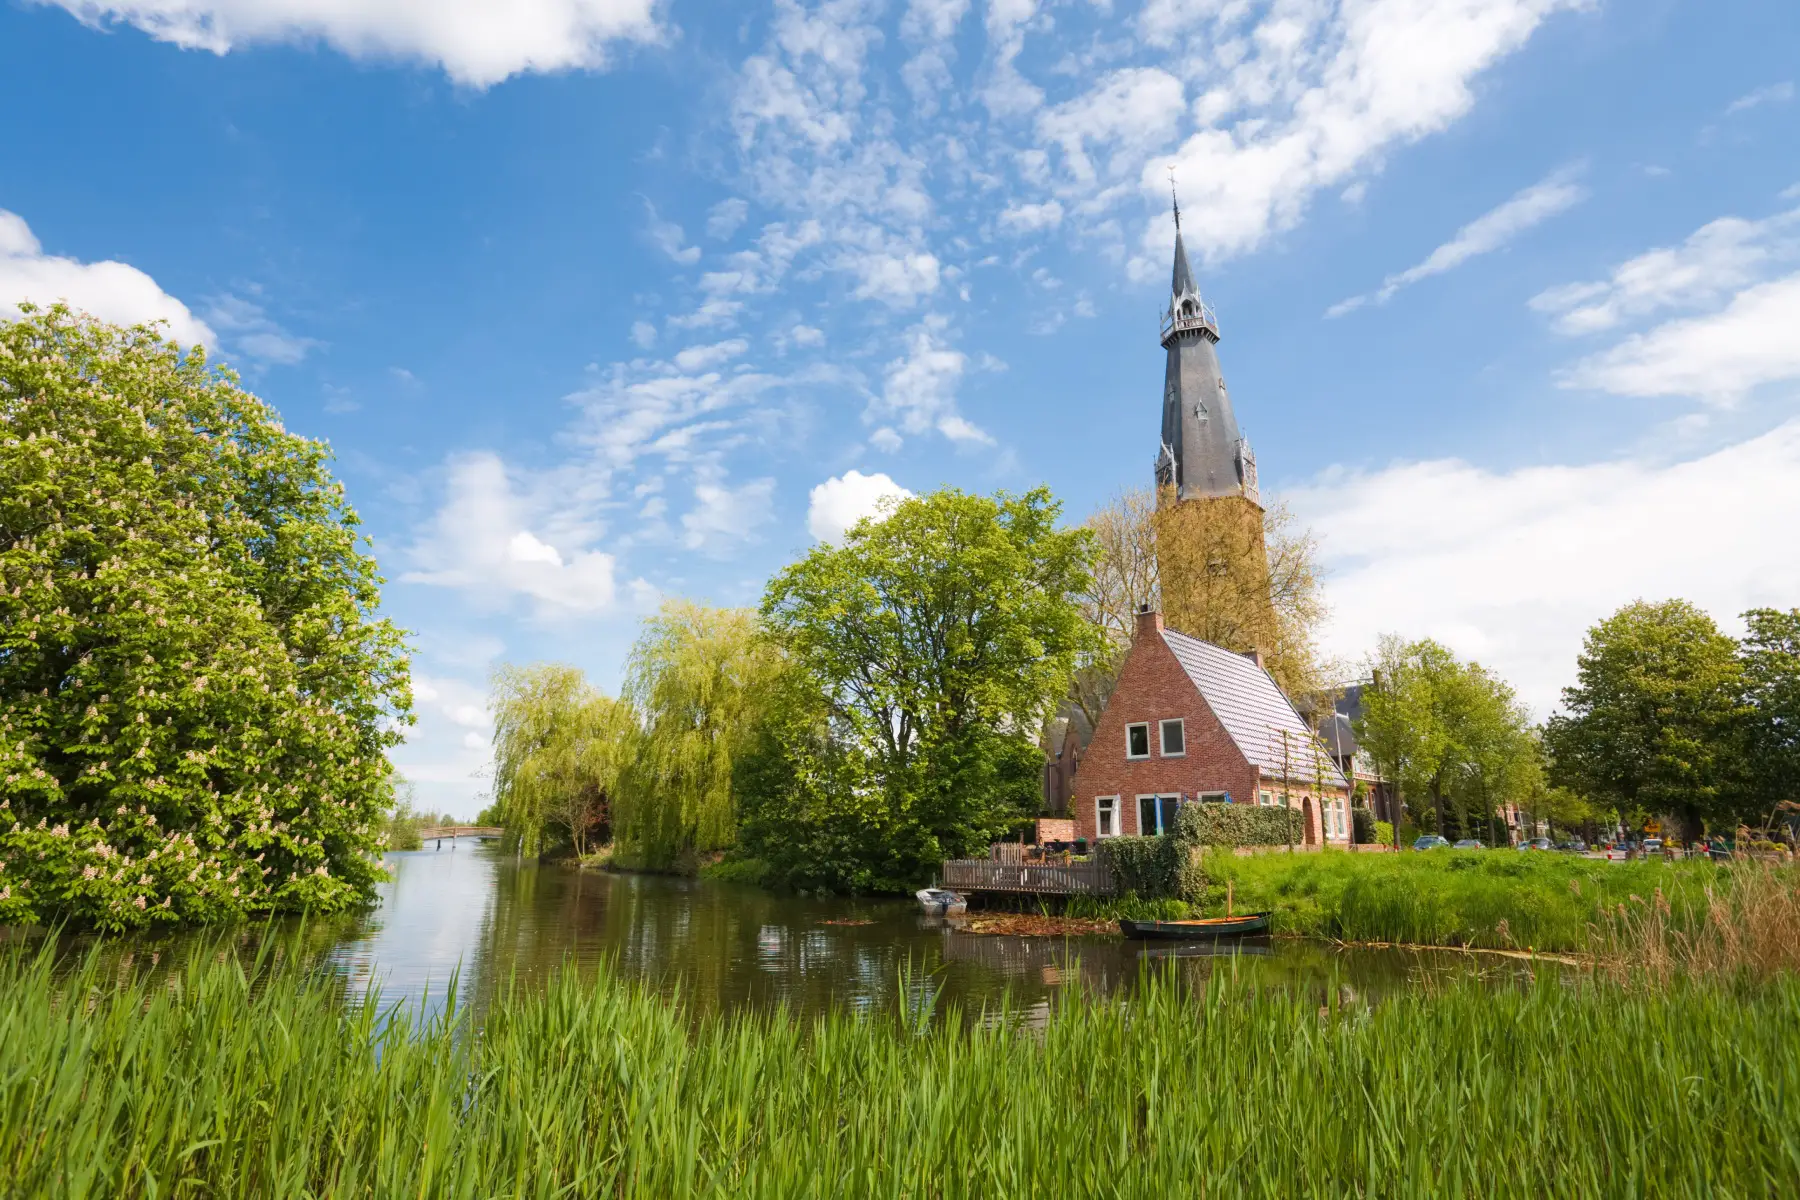 A scenic rural view of a church in Amstelveen surrounded by green fields and water